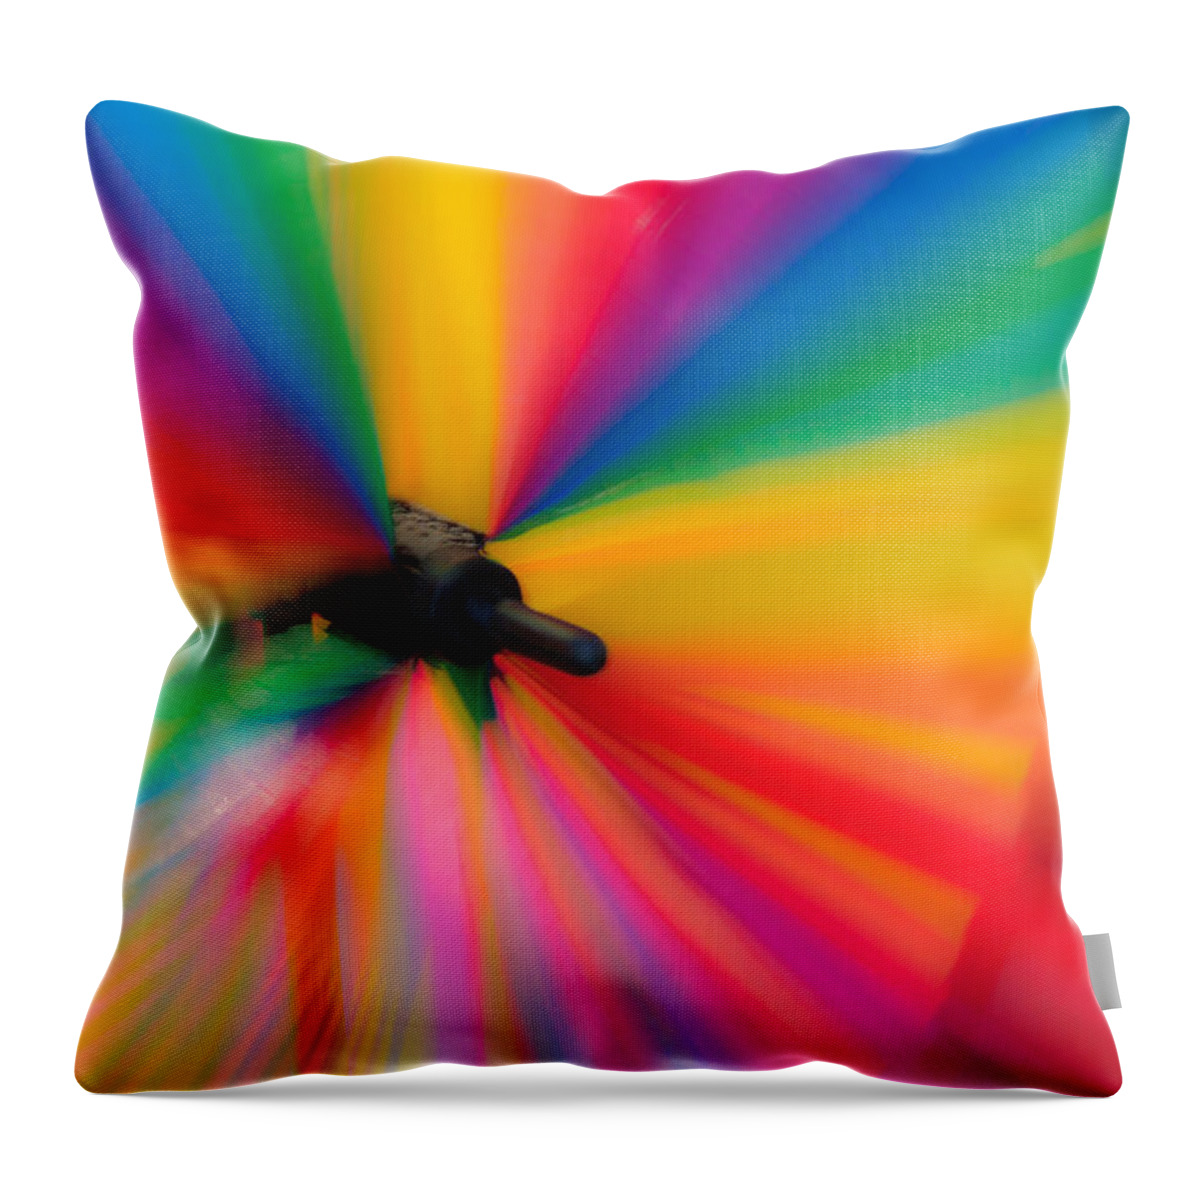 Spinning Throw Pillow featuring the photograph Whirligig by David Smith